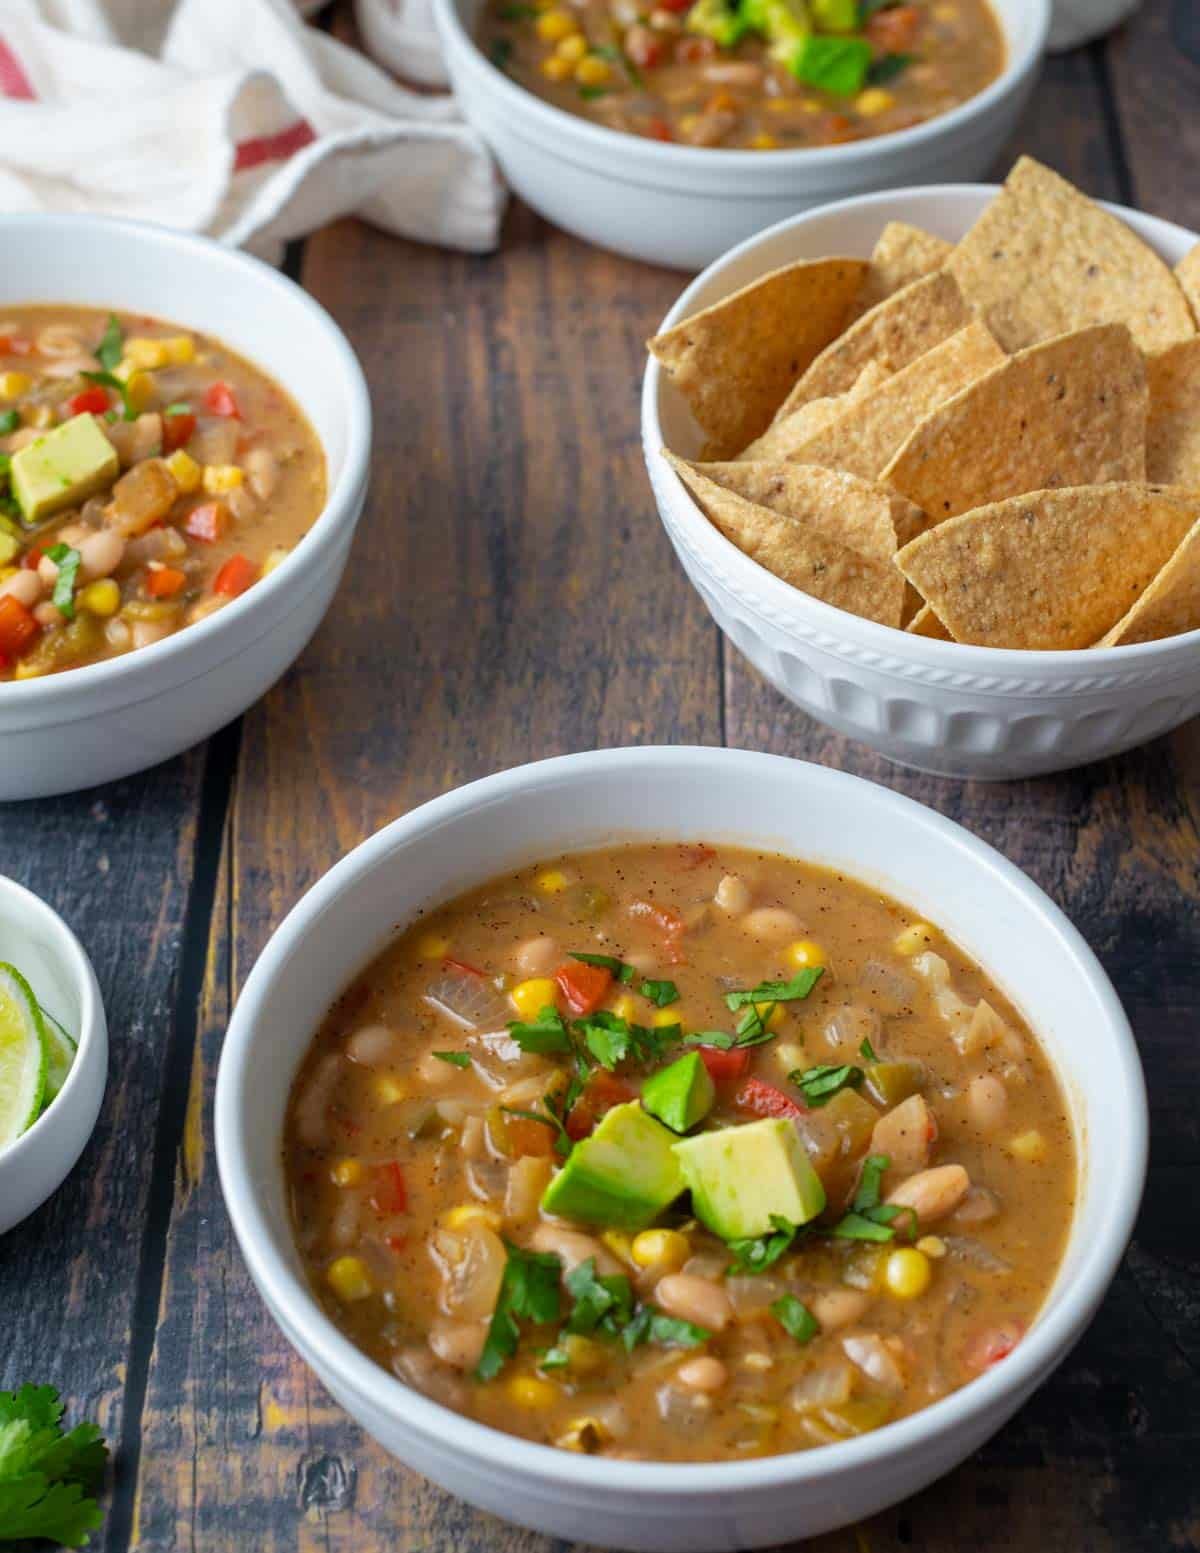 Bowls of vegan white bean chili served with a side of tortilla chips.
